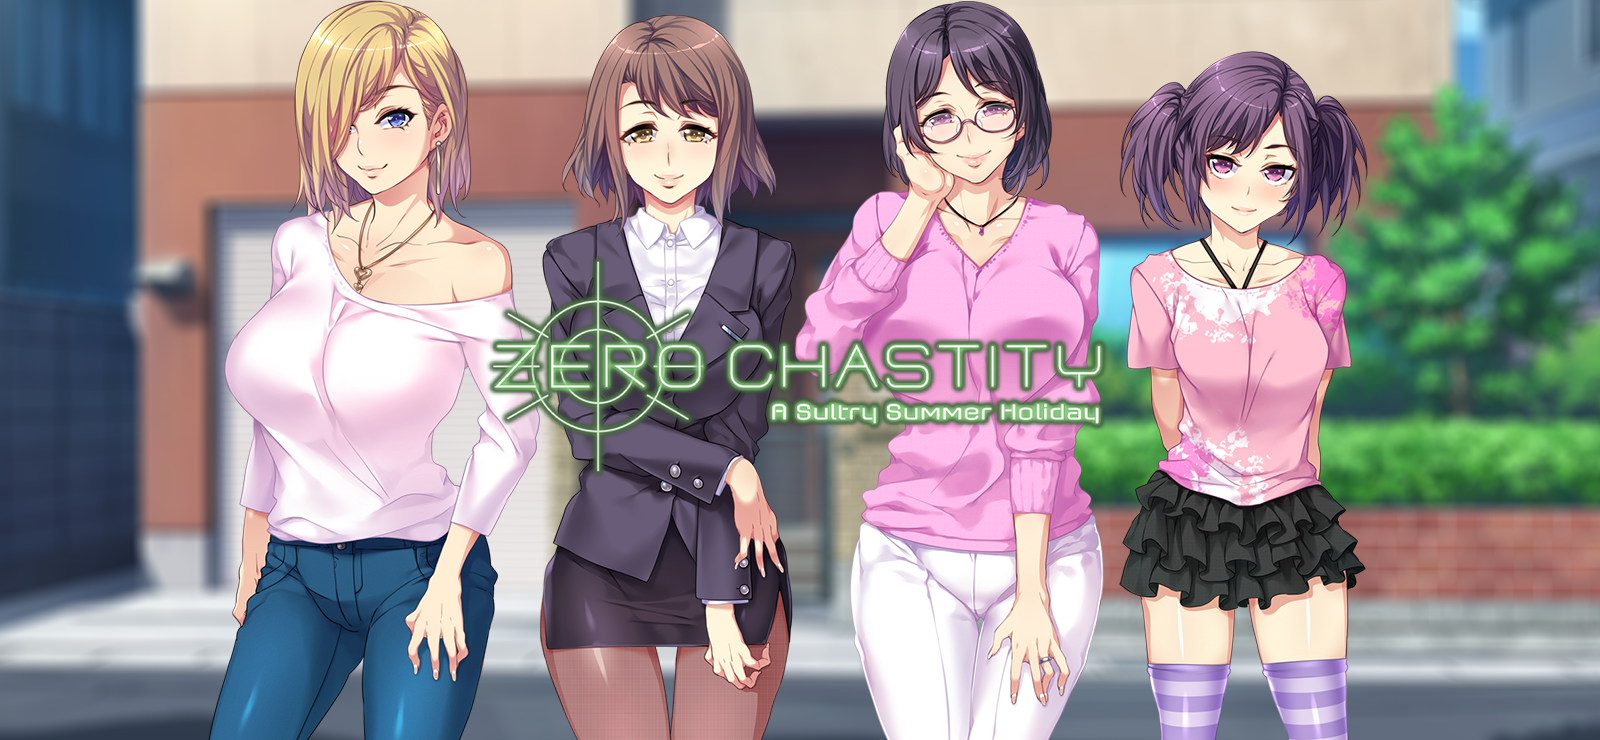 Zero Chastity: A Sultry Summer Holiday